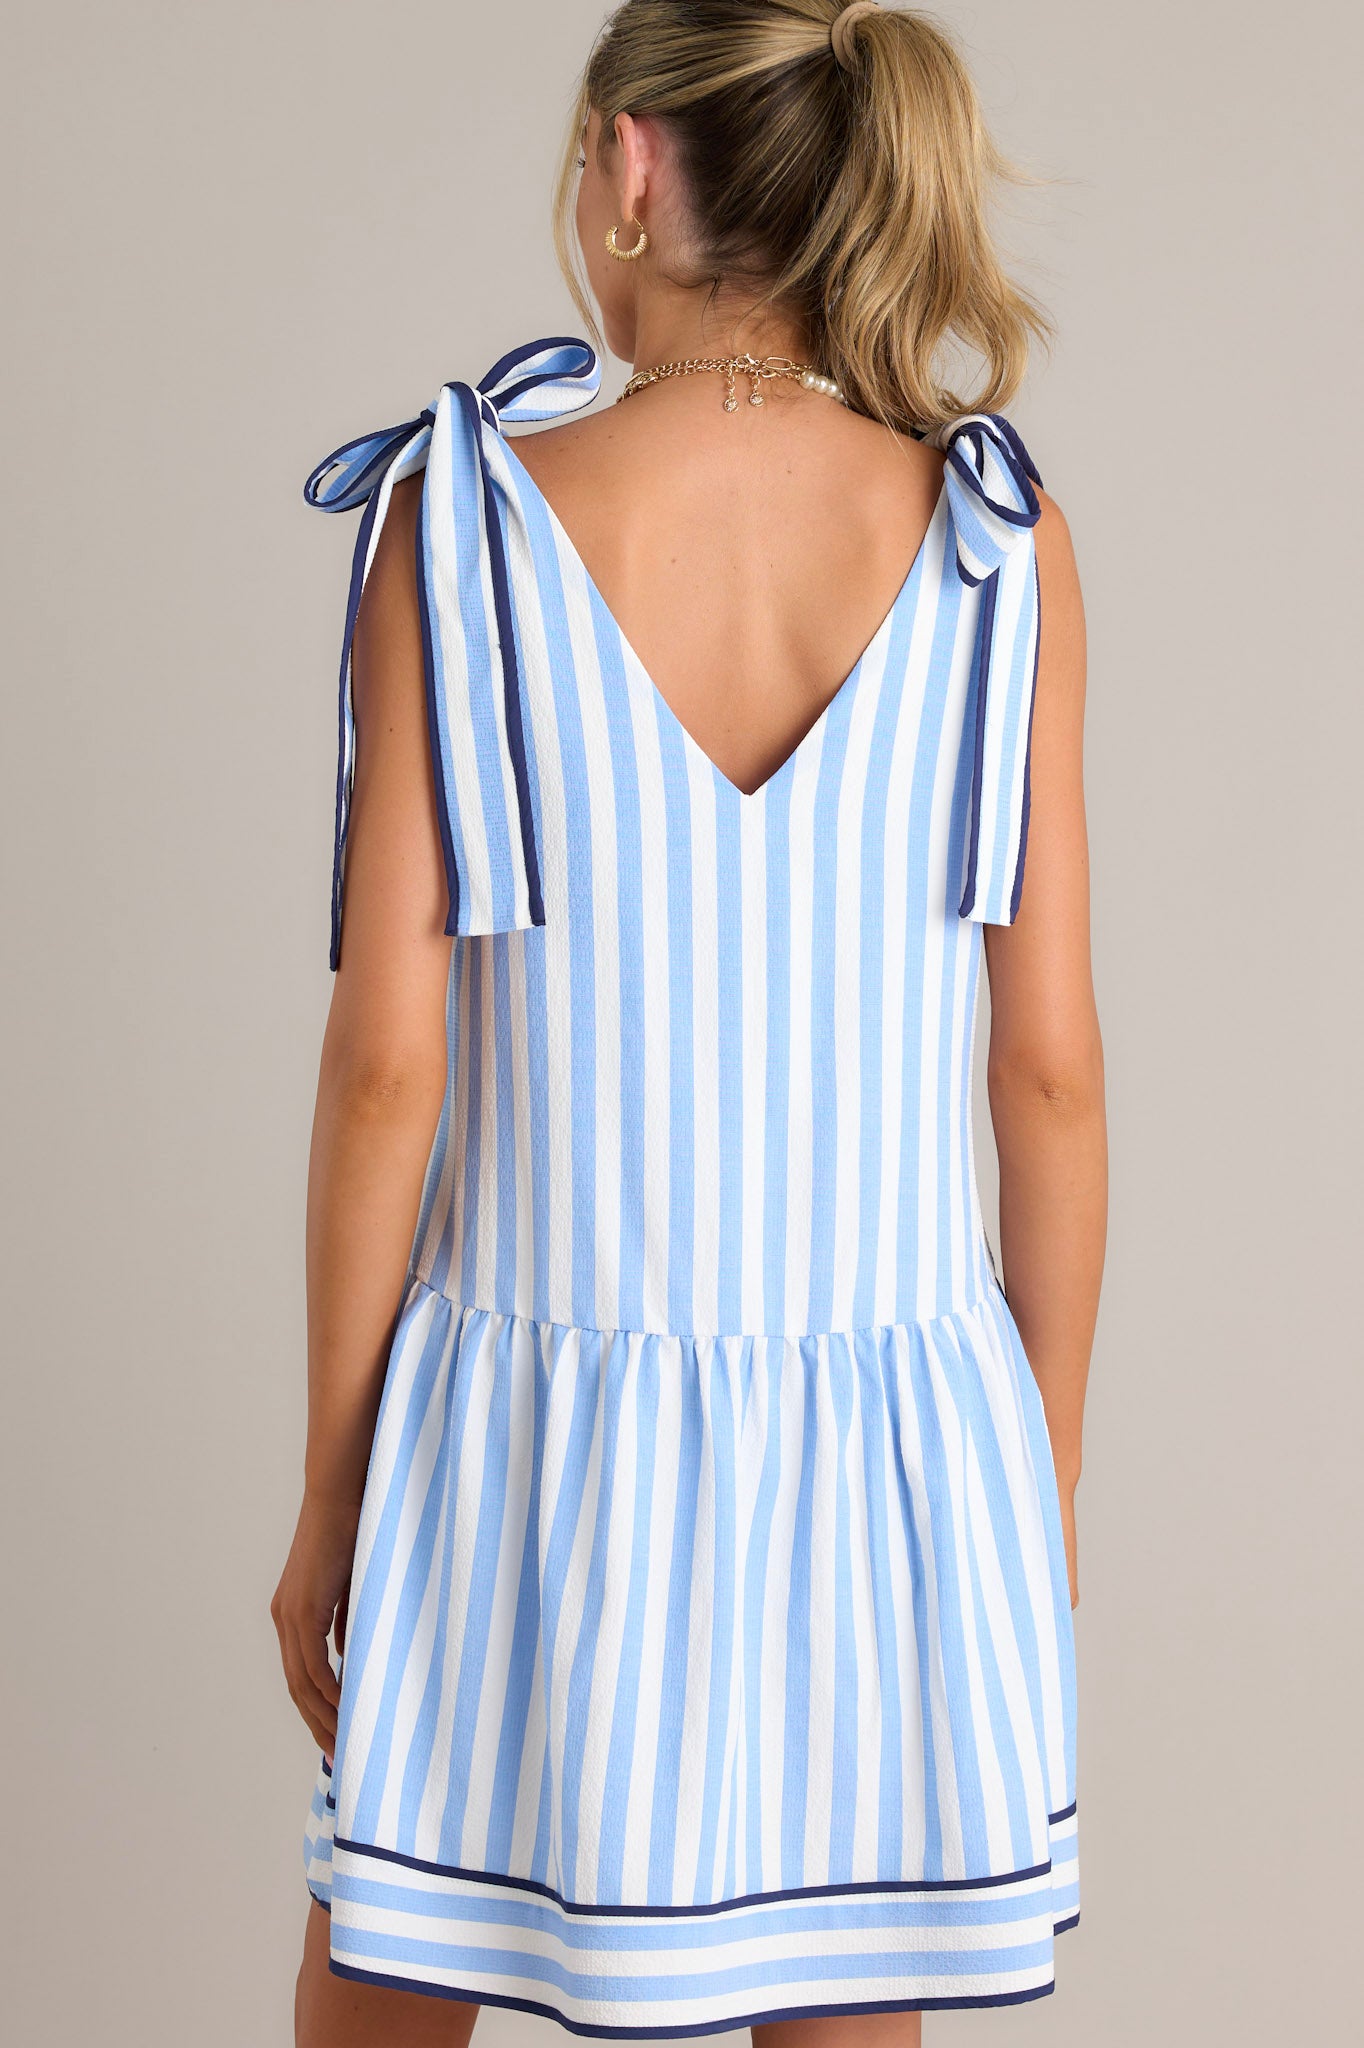 Back view of a blue mini dress highlighting the faux self-tie straps, blue & white vertical stripes, and the light & flowy material.